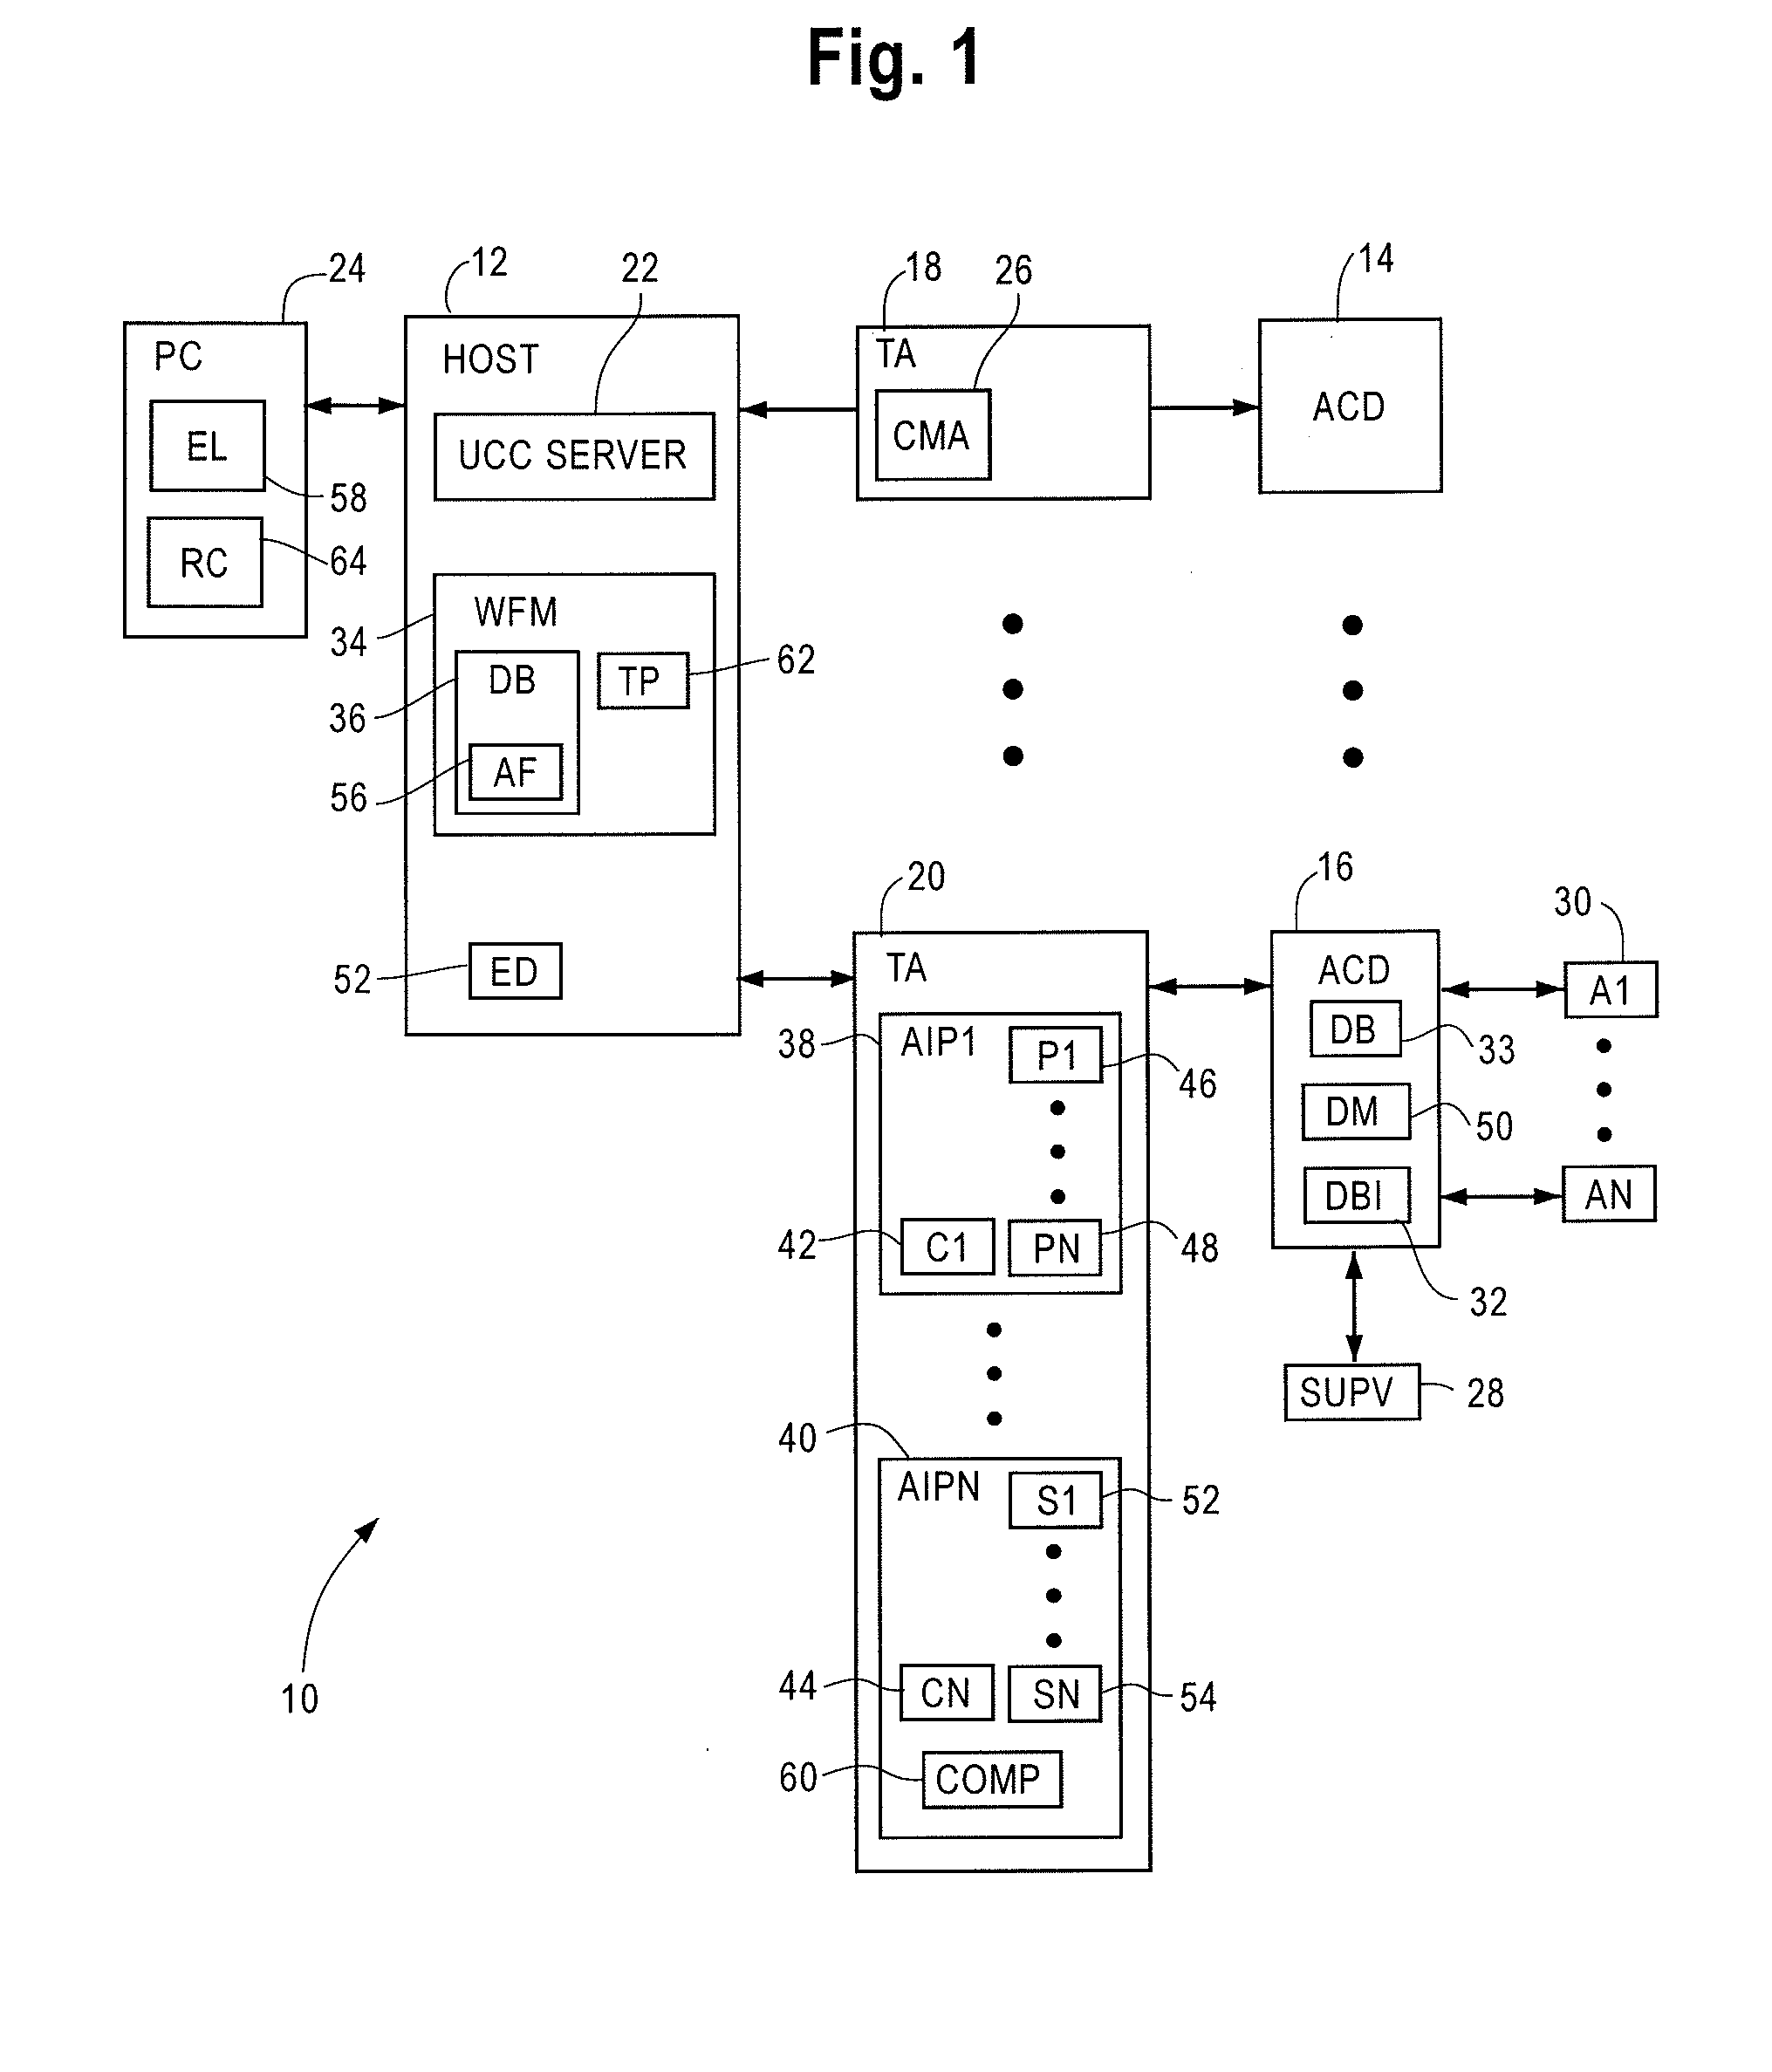 Synchronization of Data Within An ACD System